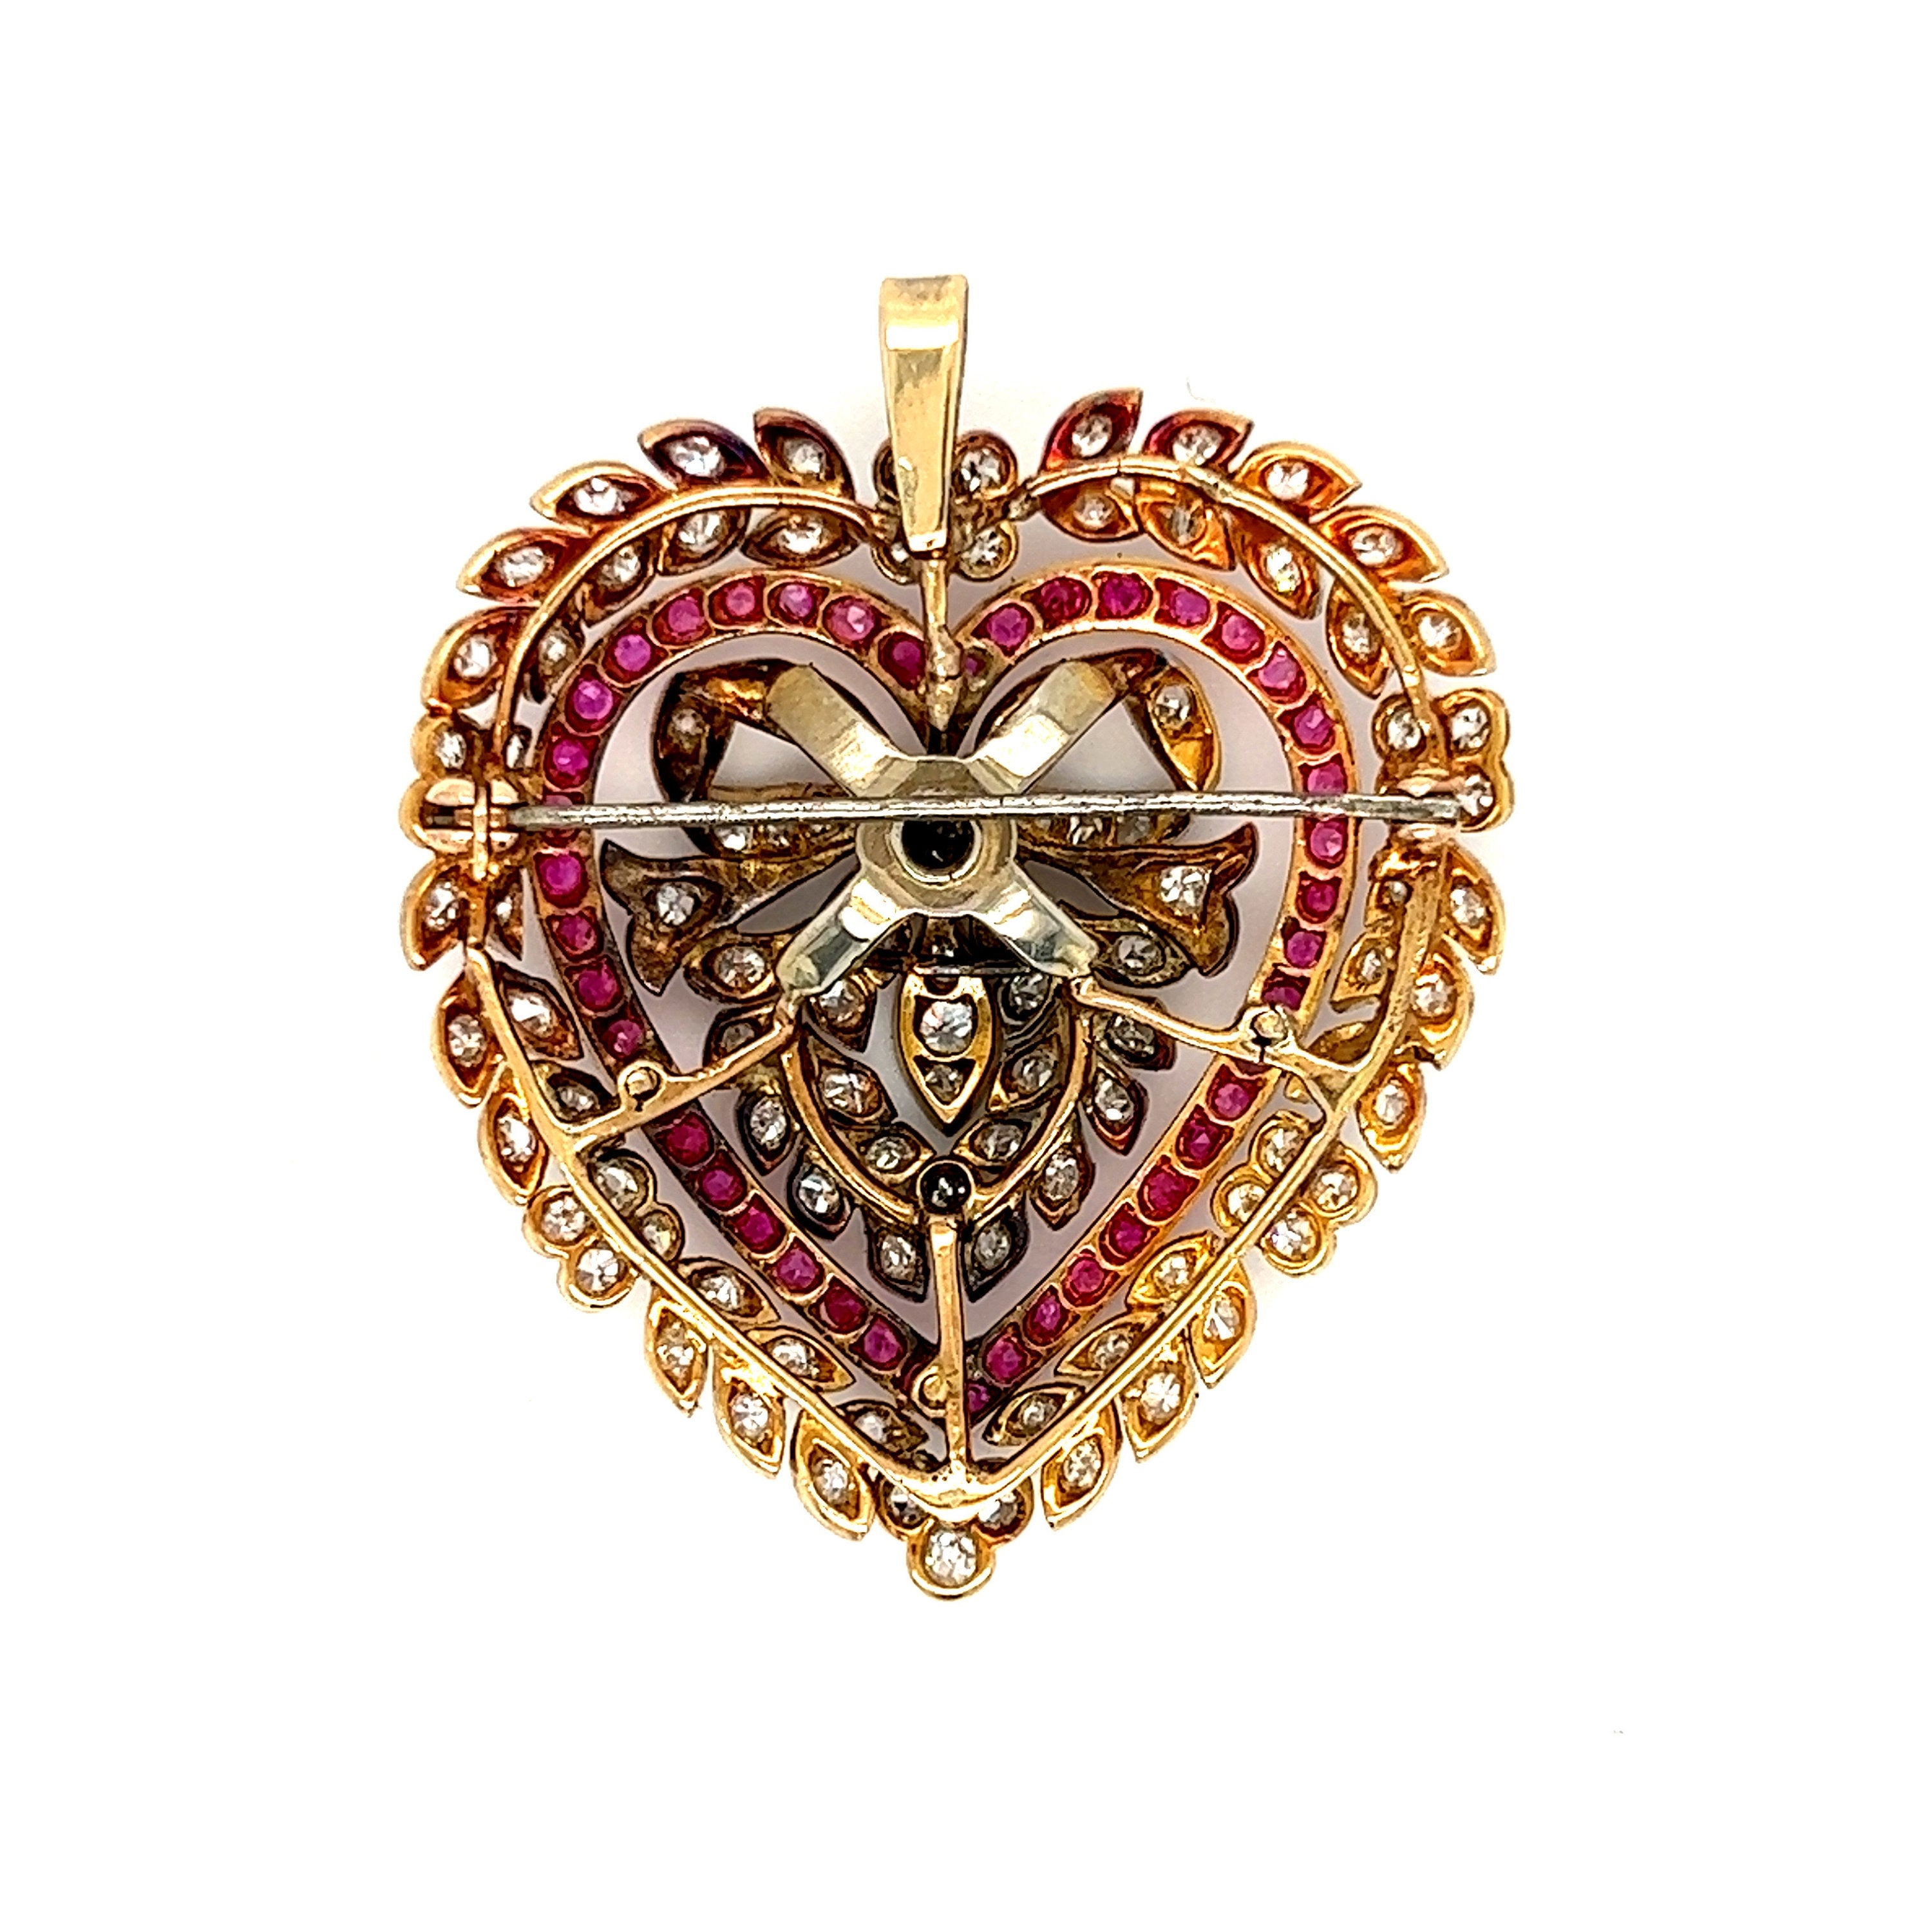 Gorgeous Antique 18K Yellow Gold/ Platinum Diamond and Ruby Heart Pin/ Brooch/ Pendant.